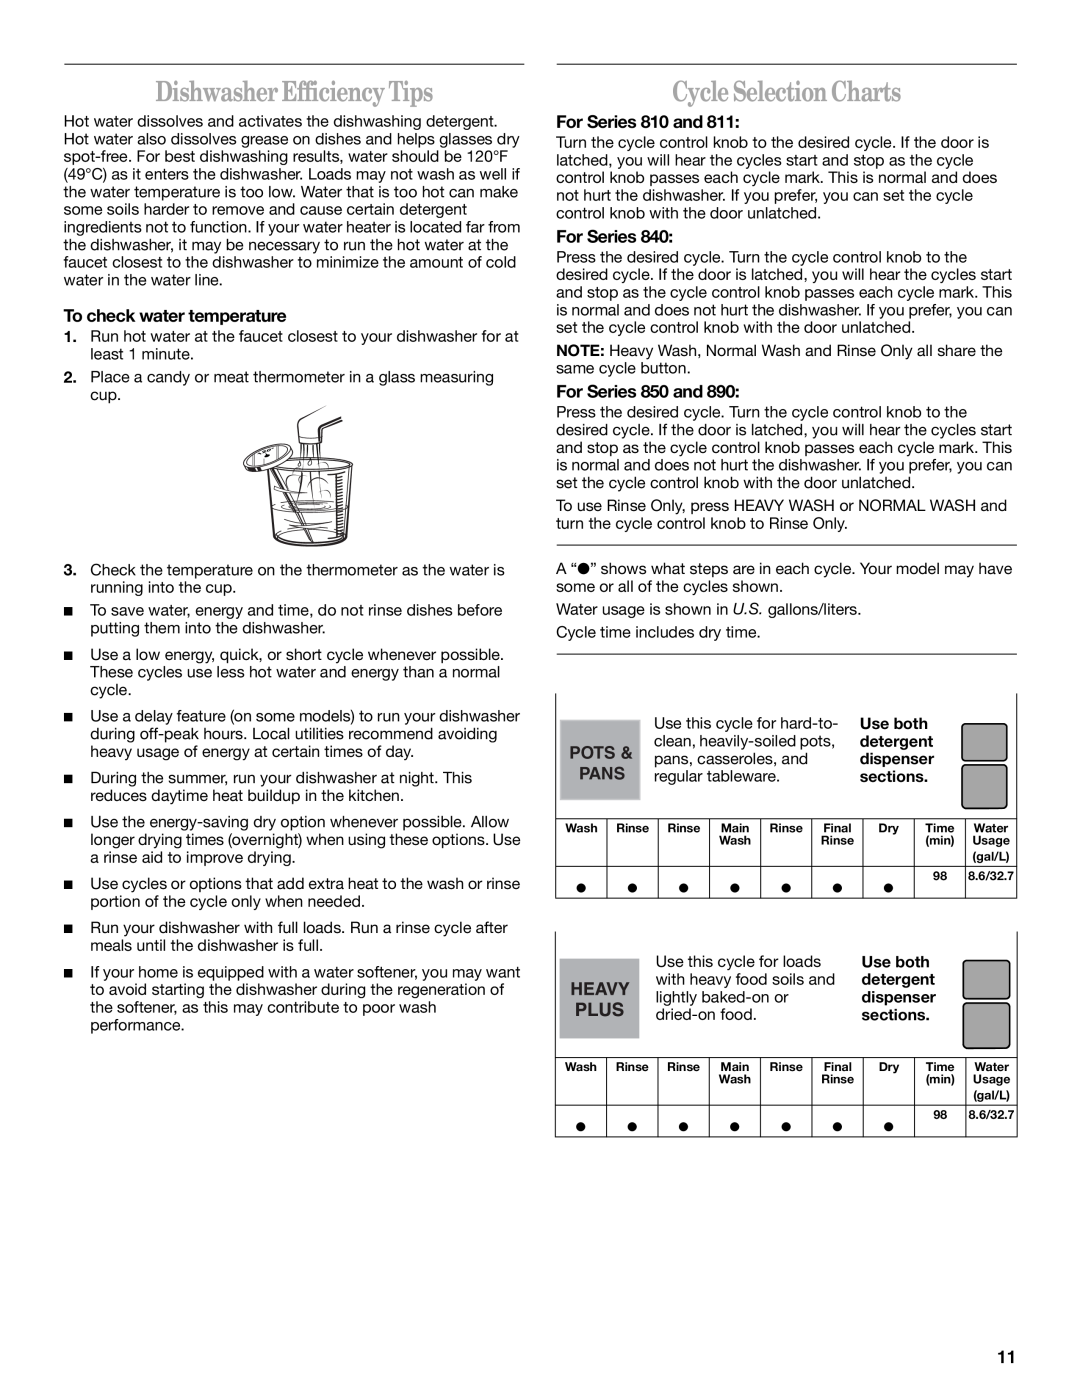 Whirlpool Dishwasher Efficiency Tips, Cycle Selection Charts, To check water temperature, For Series 810 and, Pots 